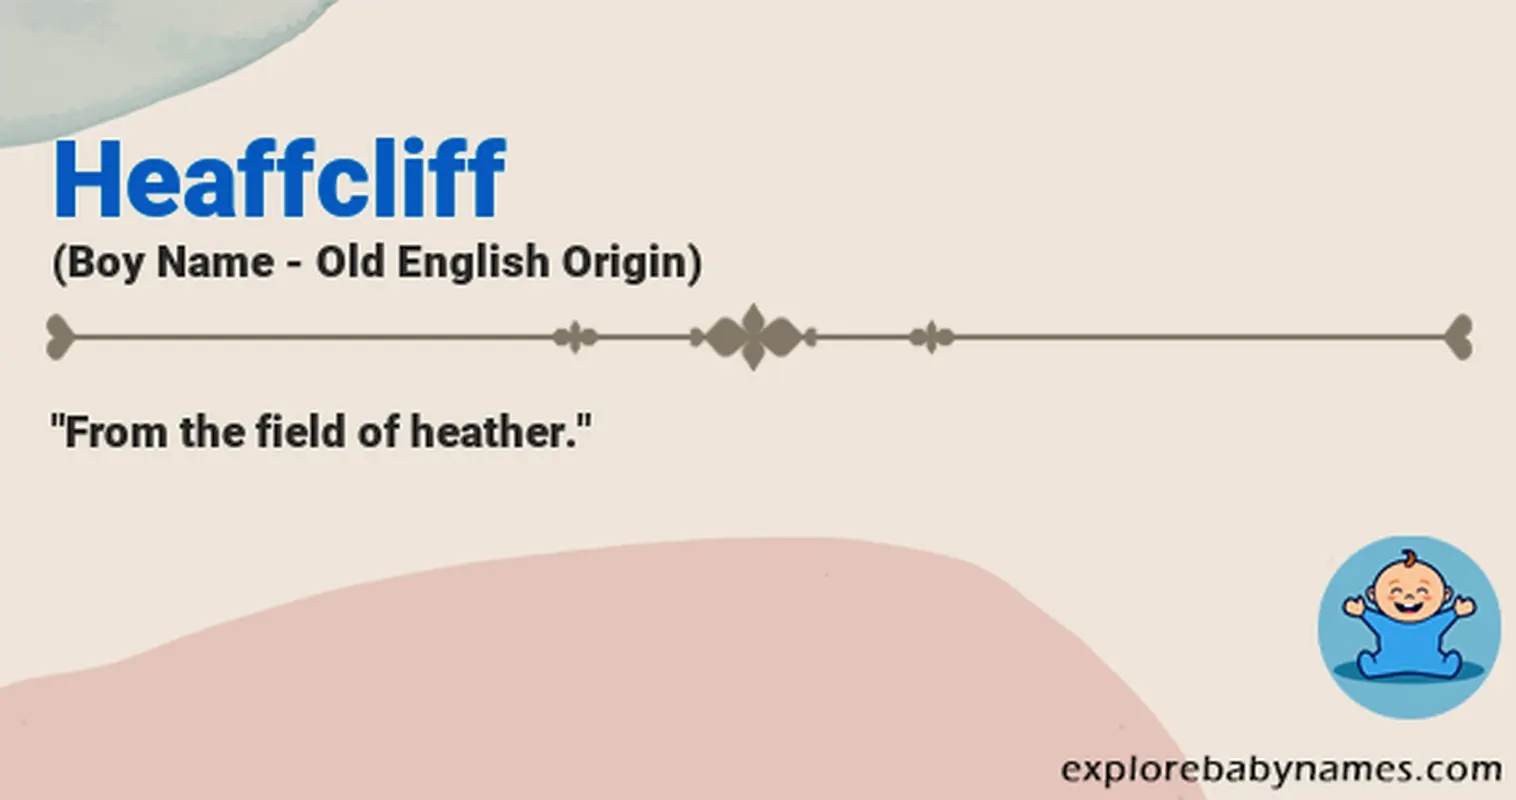 Meaning of Heaffcliff